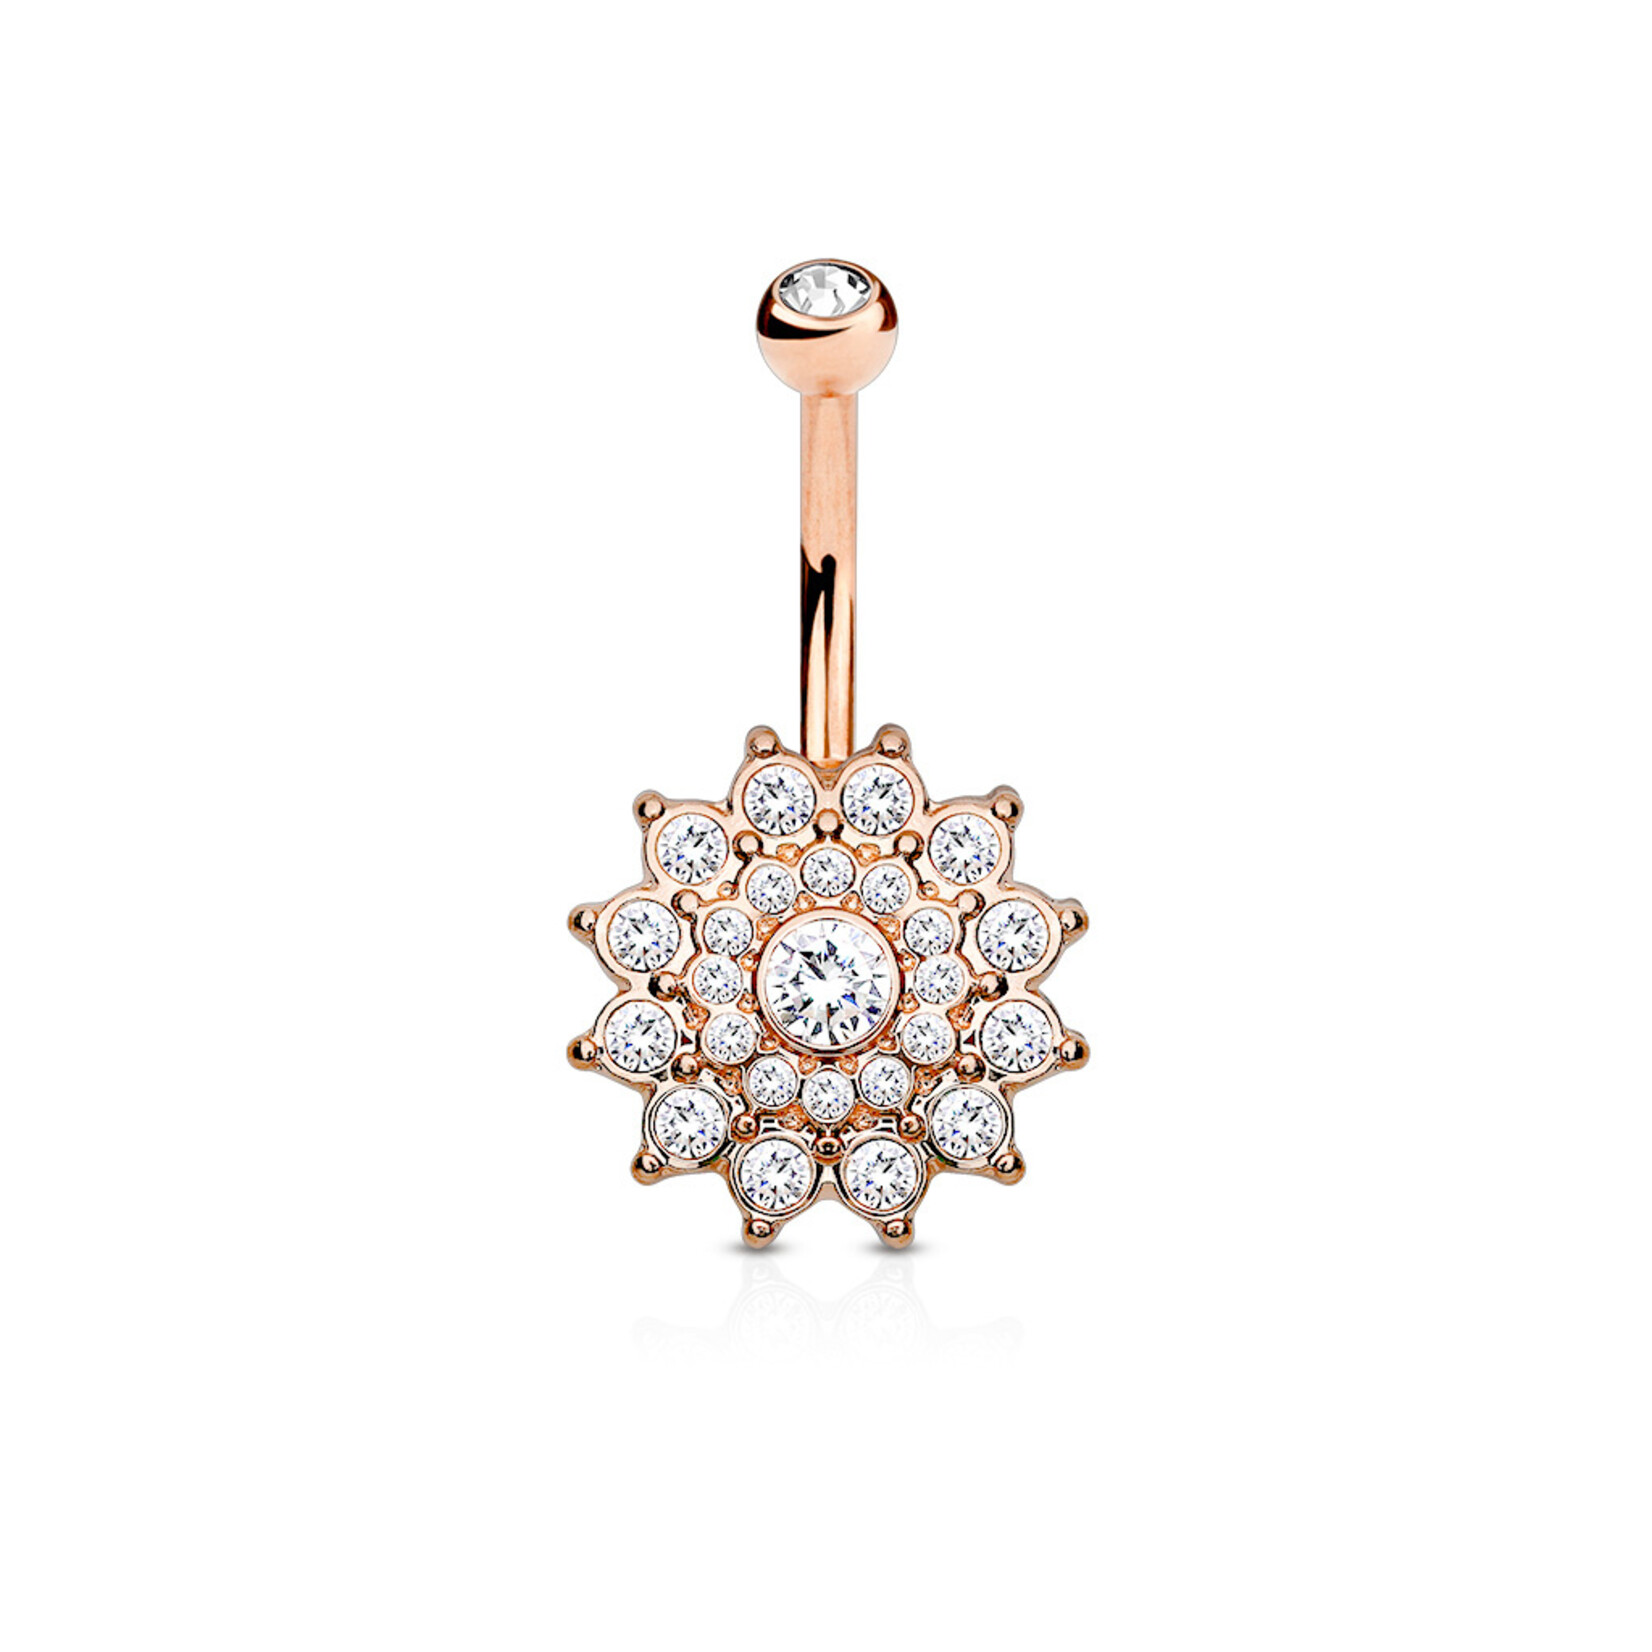 Hollywood Body Jewelry Rose Gold Dahlia Navel Ring